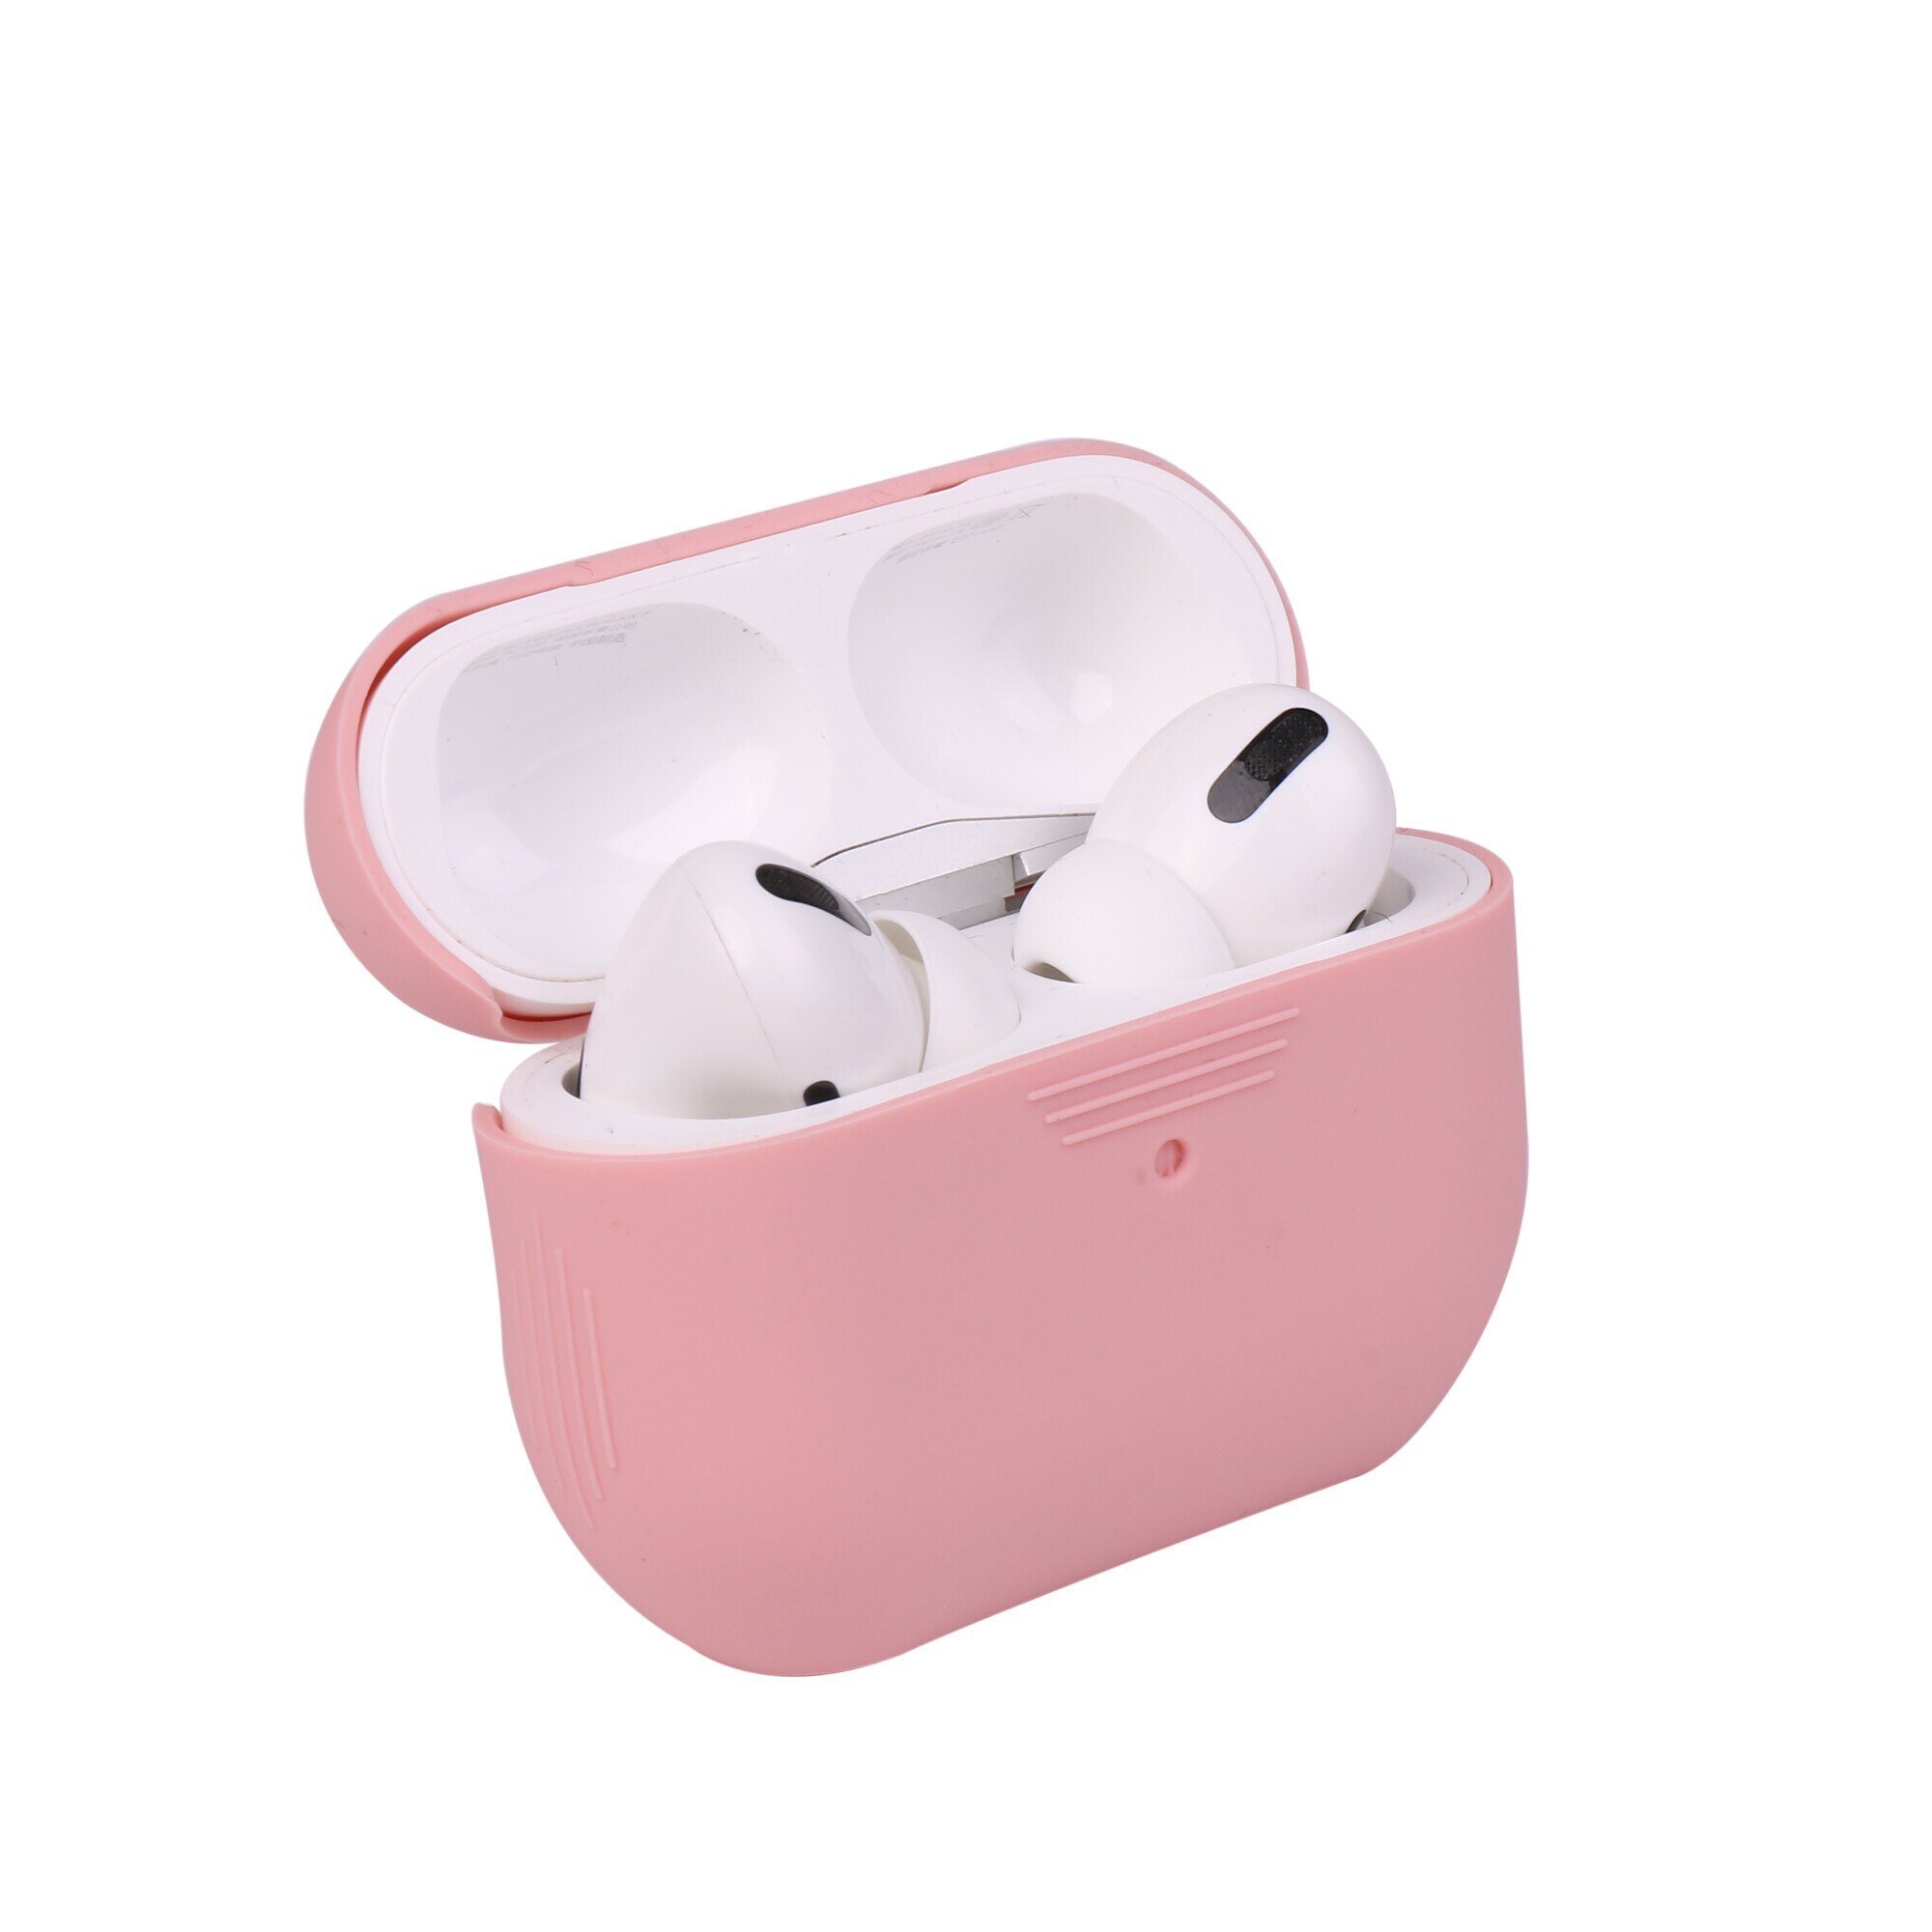 dose Much battery Husa de protectie NEXT ONE pentru AirPods Pro, Silicon, Roz - eMAG.ro